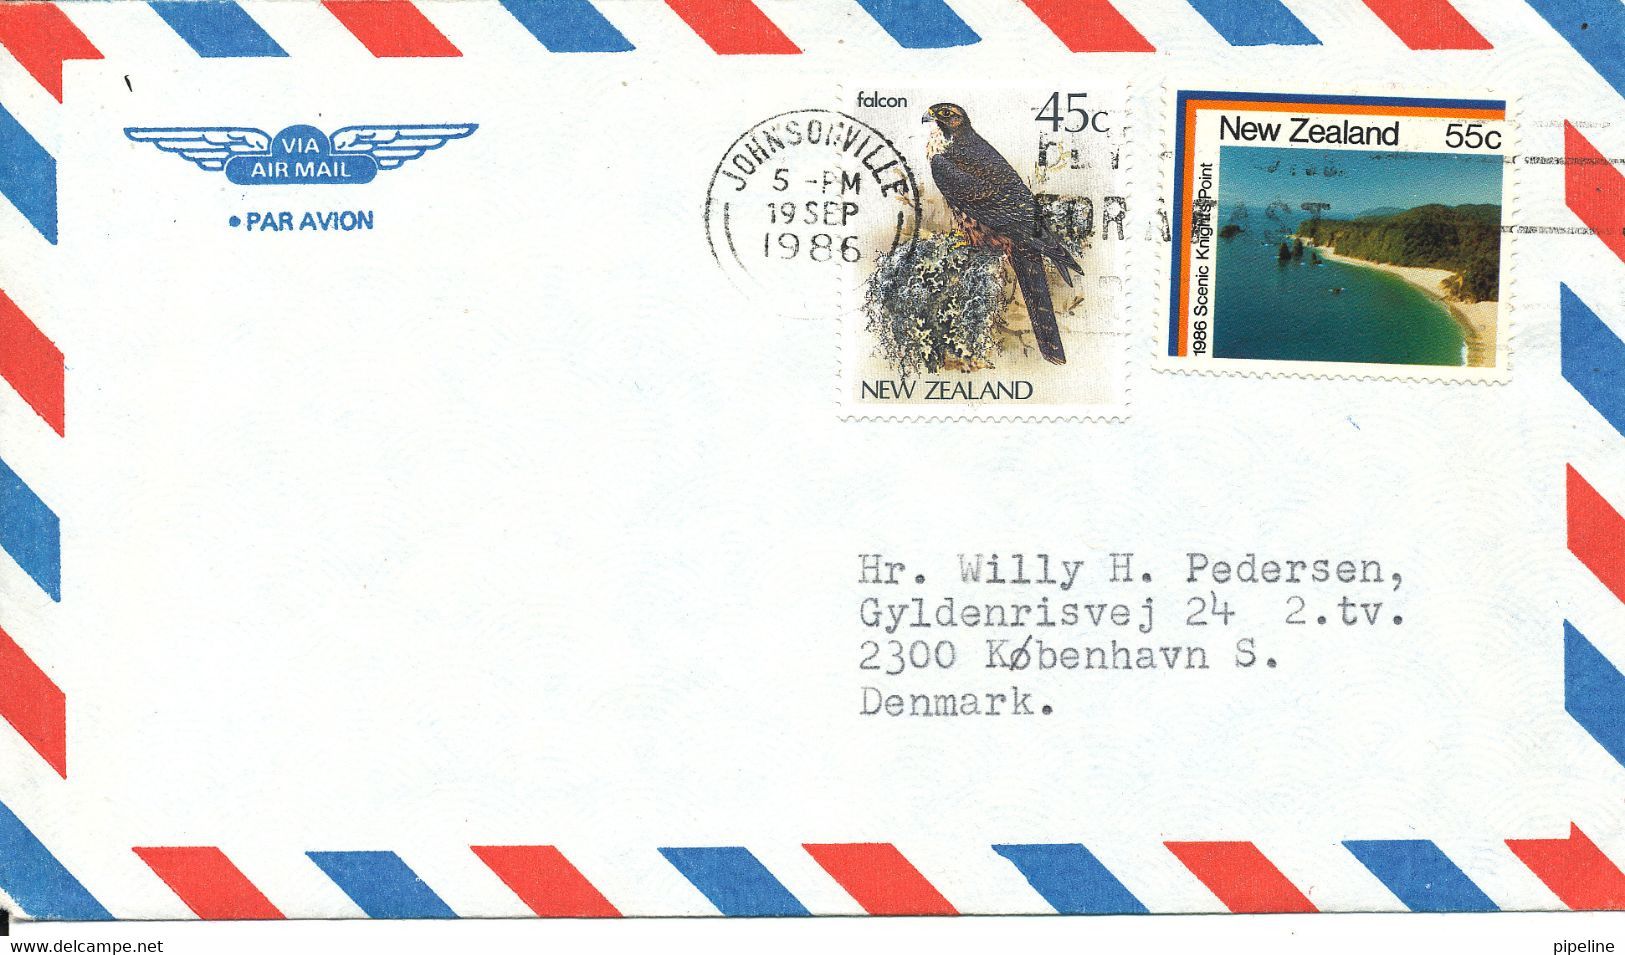 News Zealand Air Mail Cover Sent To Denmark Johnsonville 19-9-1986 BIRD Stamp - Airmail